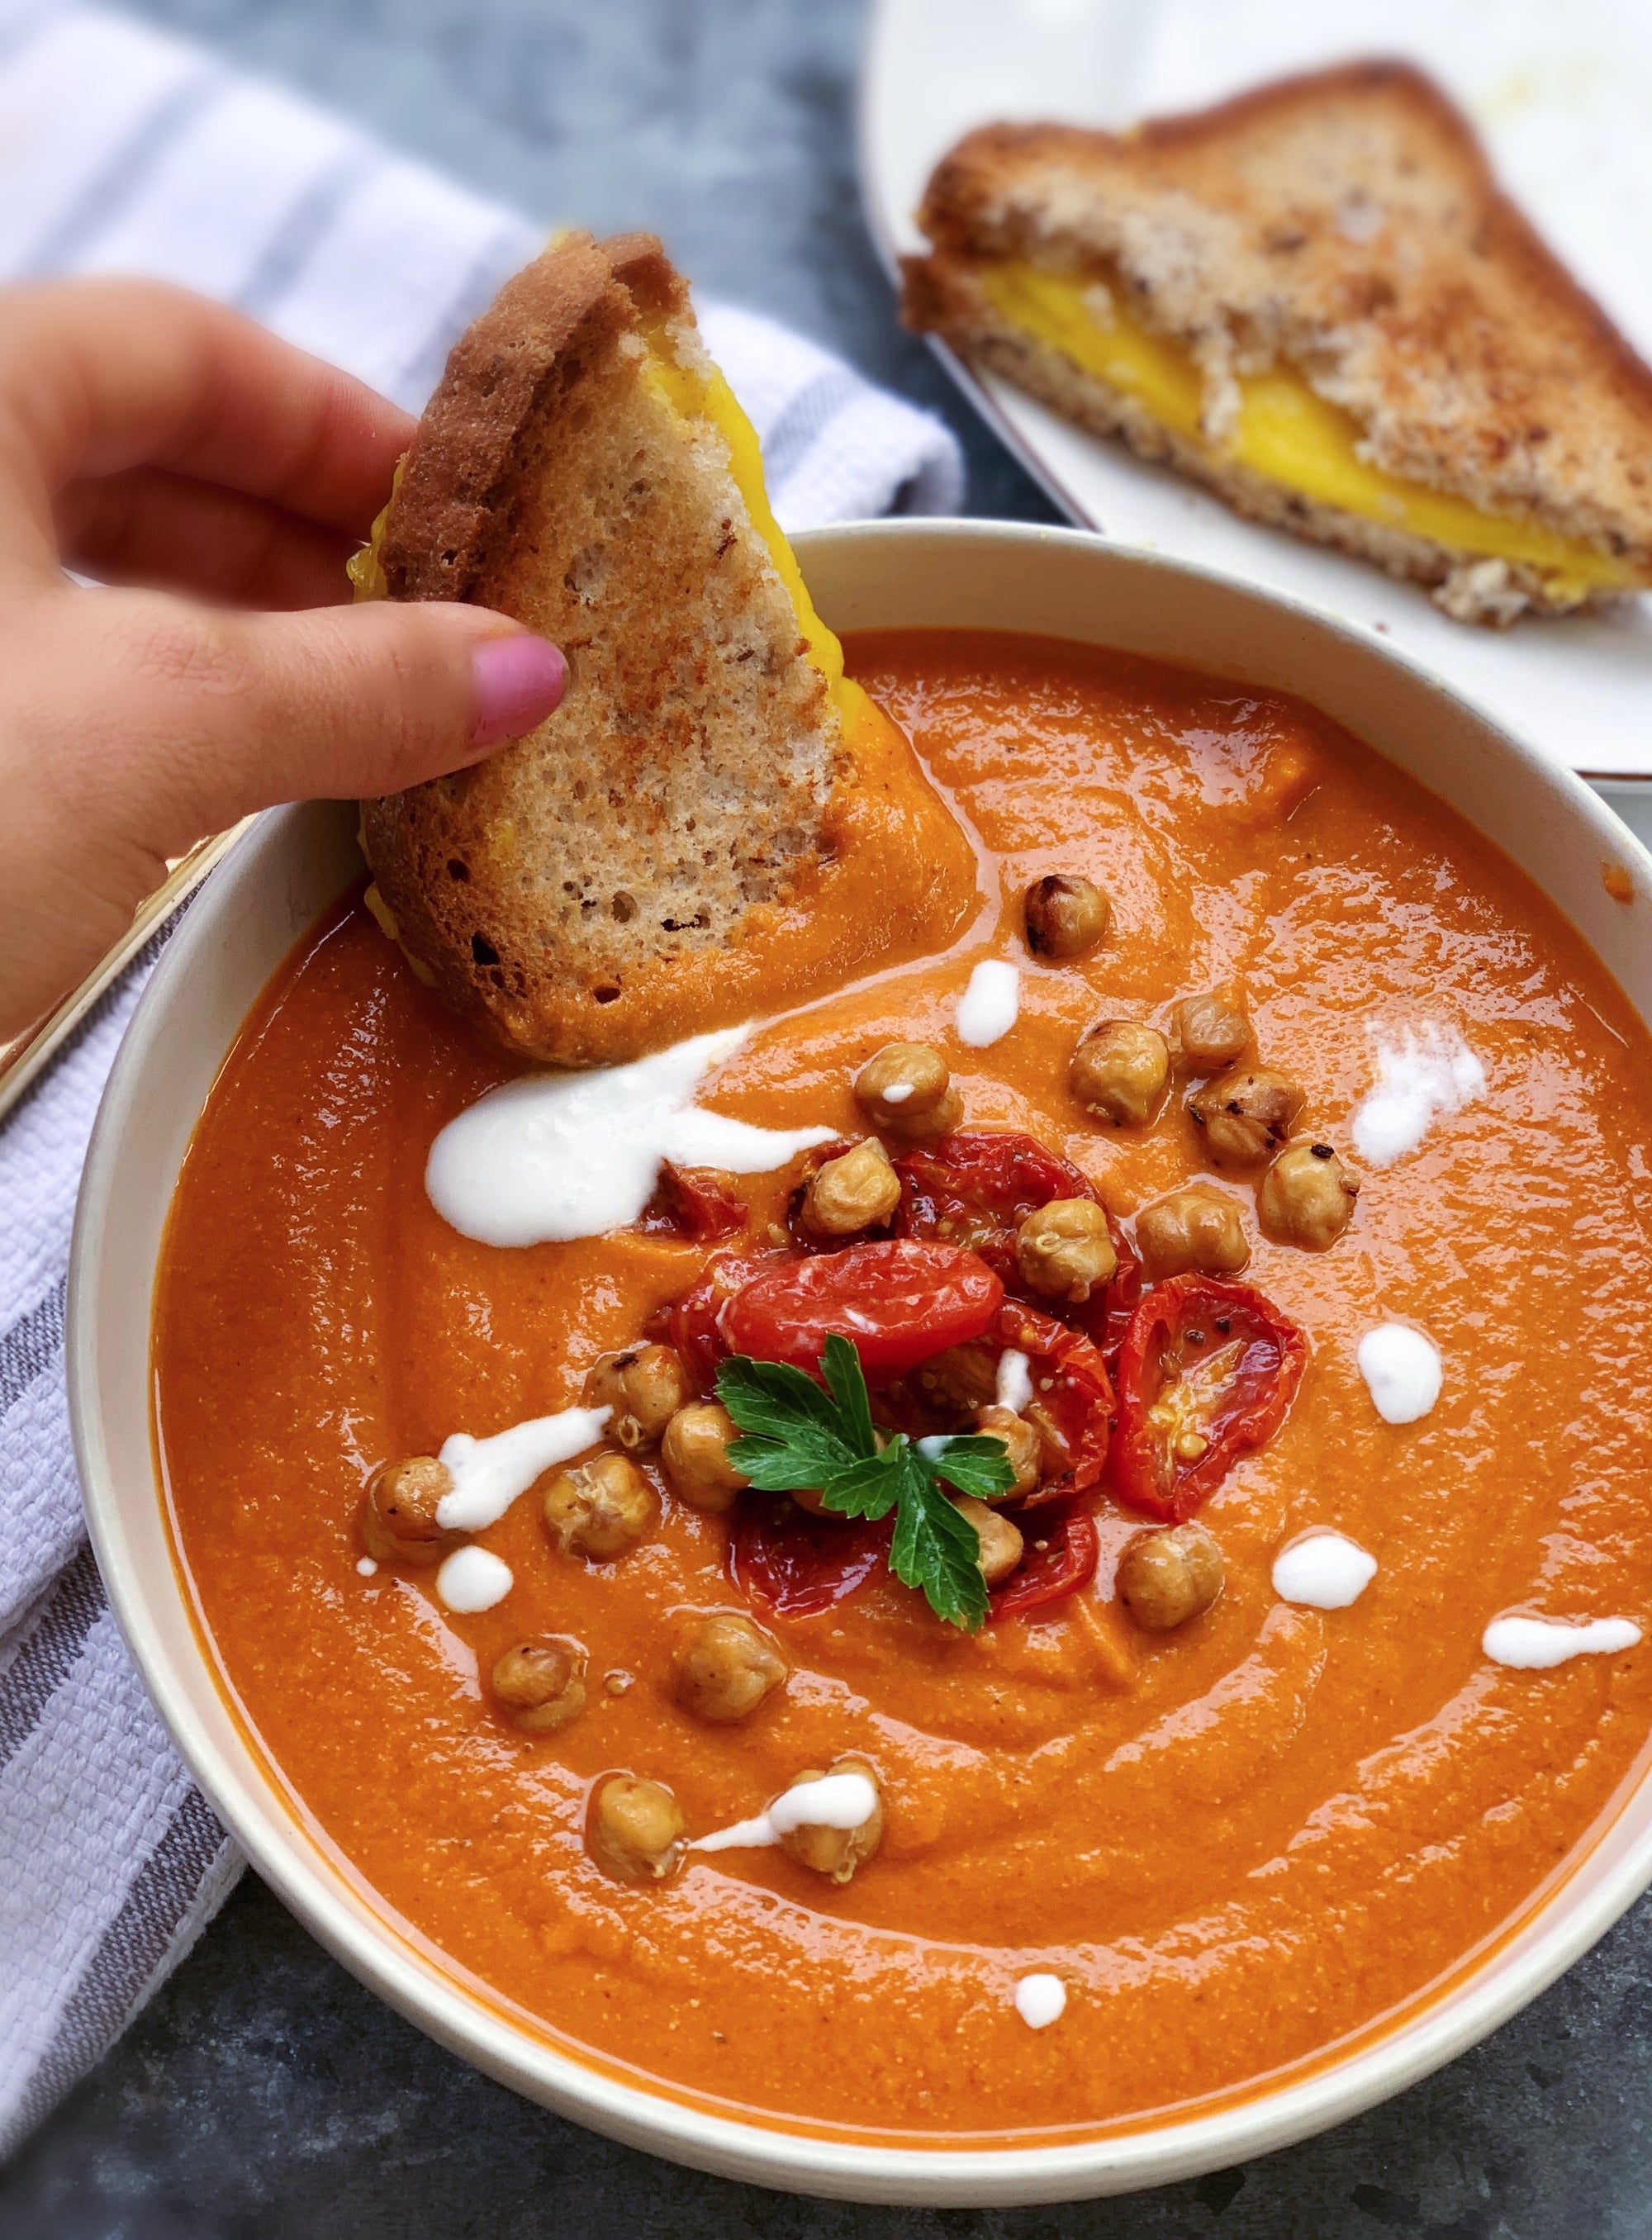 CREAMY TOMATO SOUP w/ GRILLED CHEESE